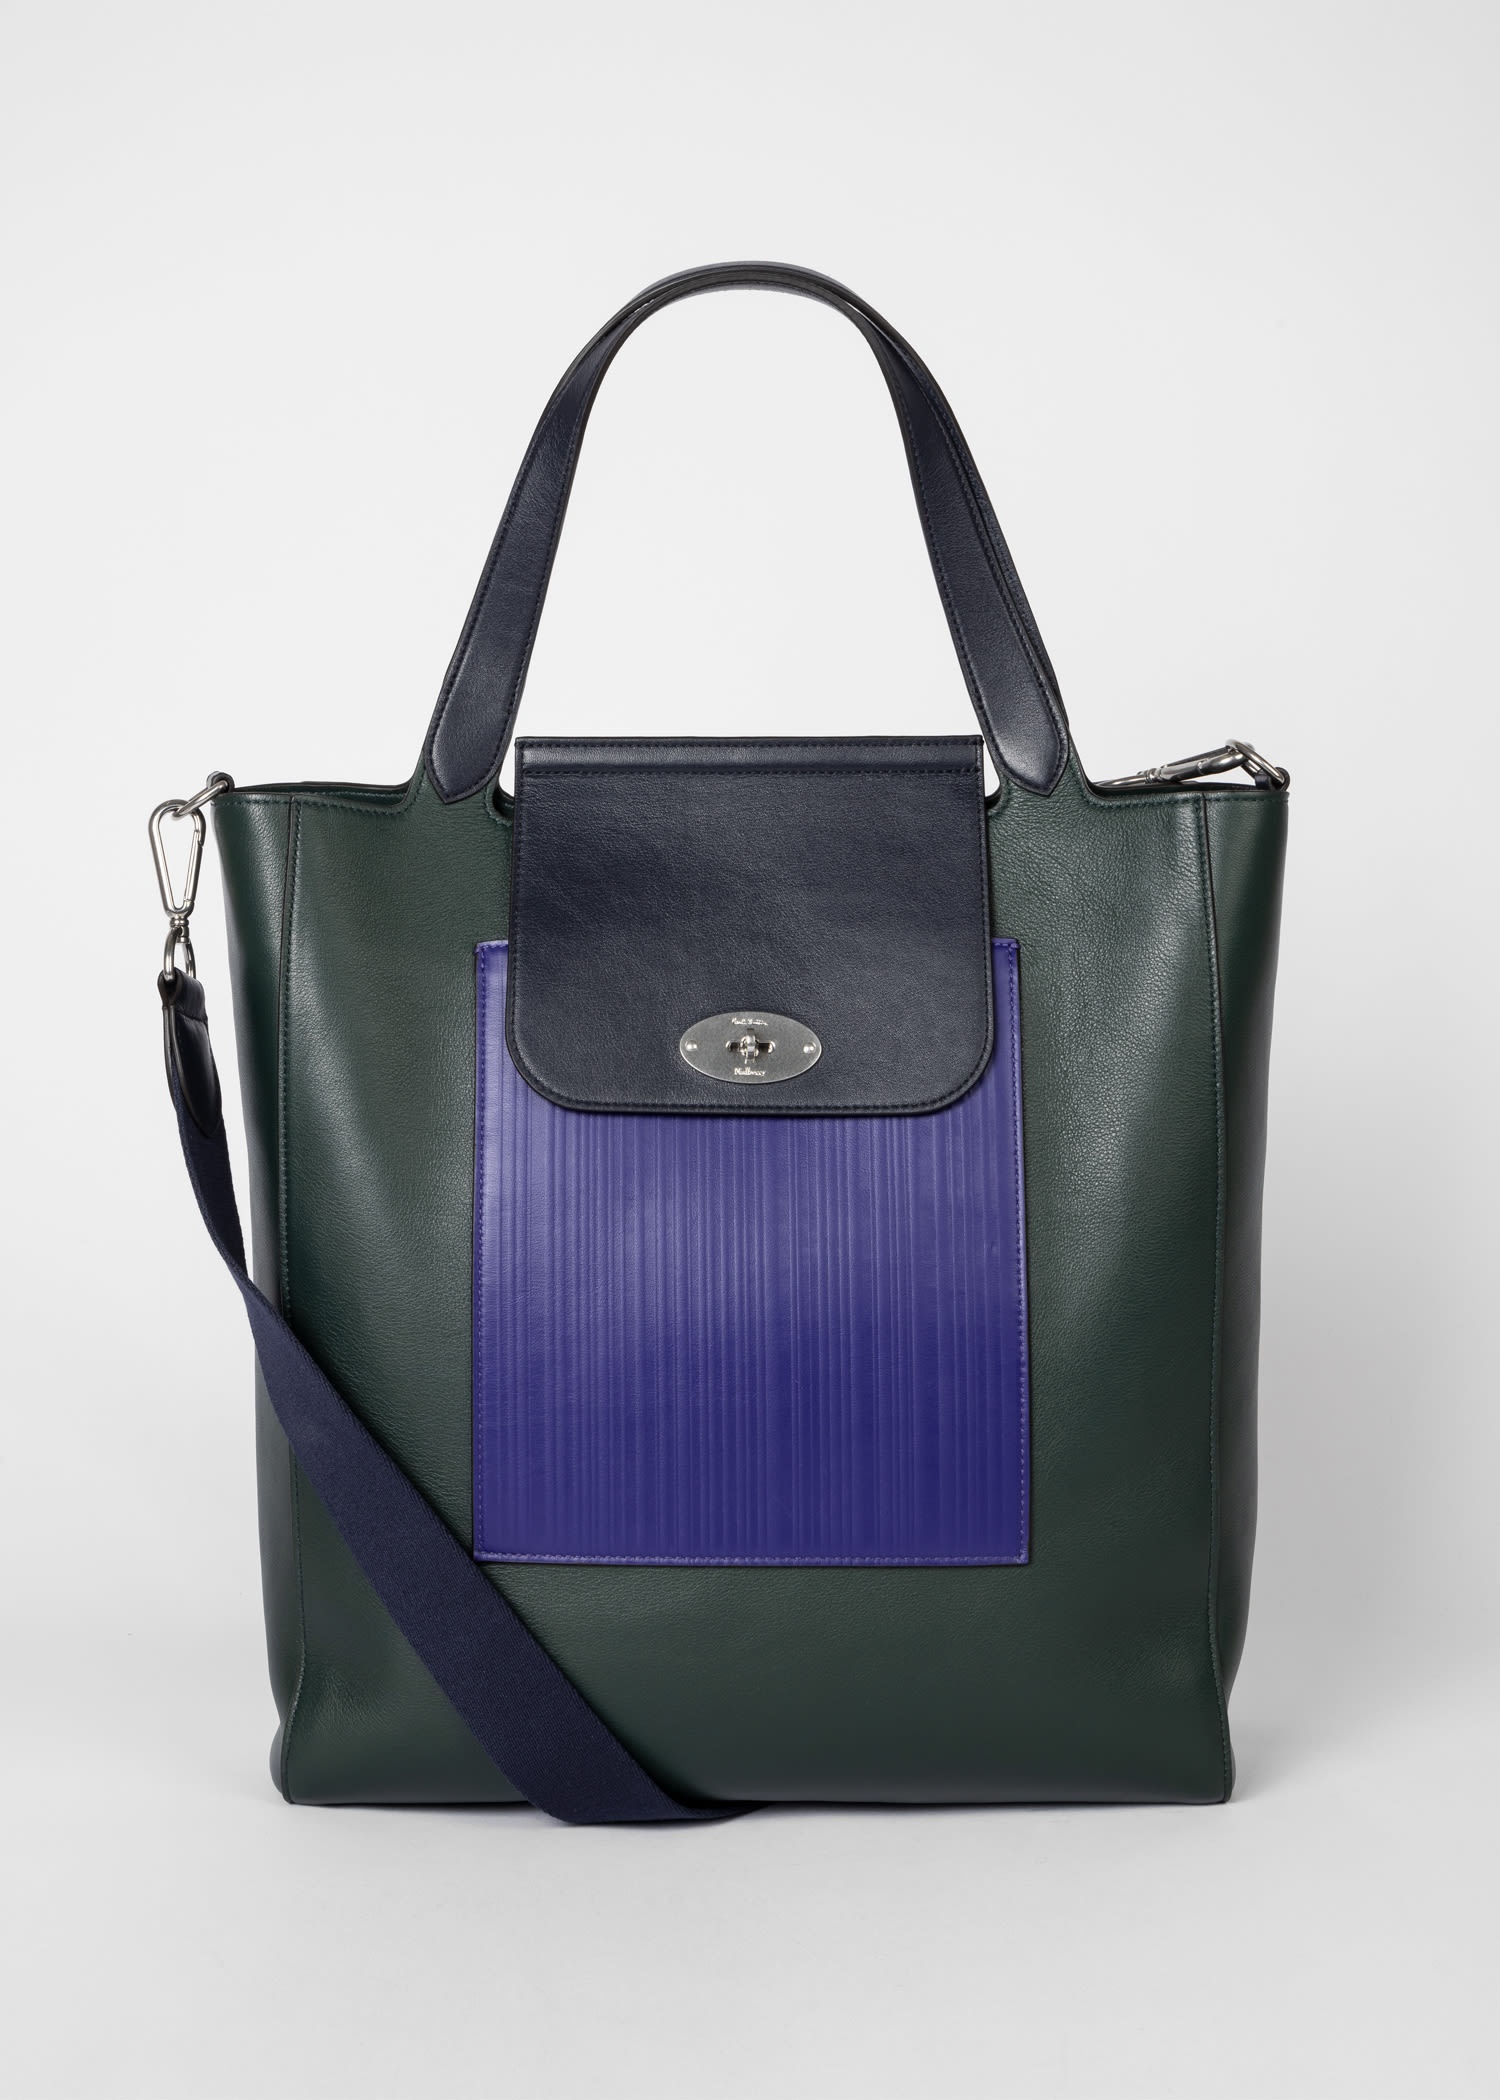 Mulberry x Paul Smith - Mulberry Green Antony Tote Bag - 2